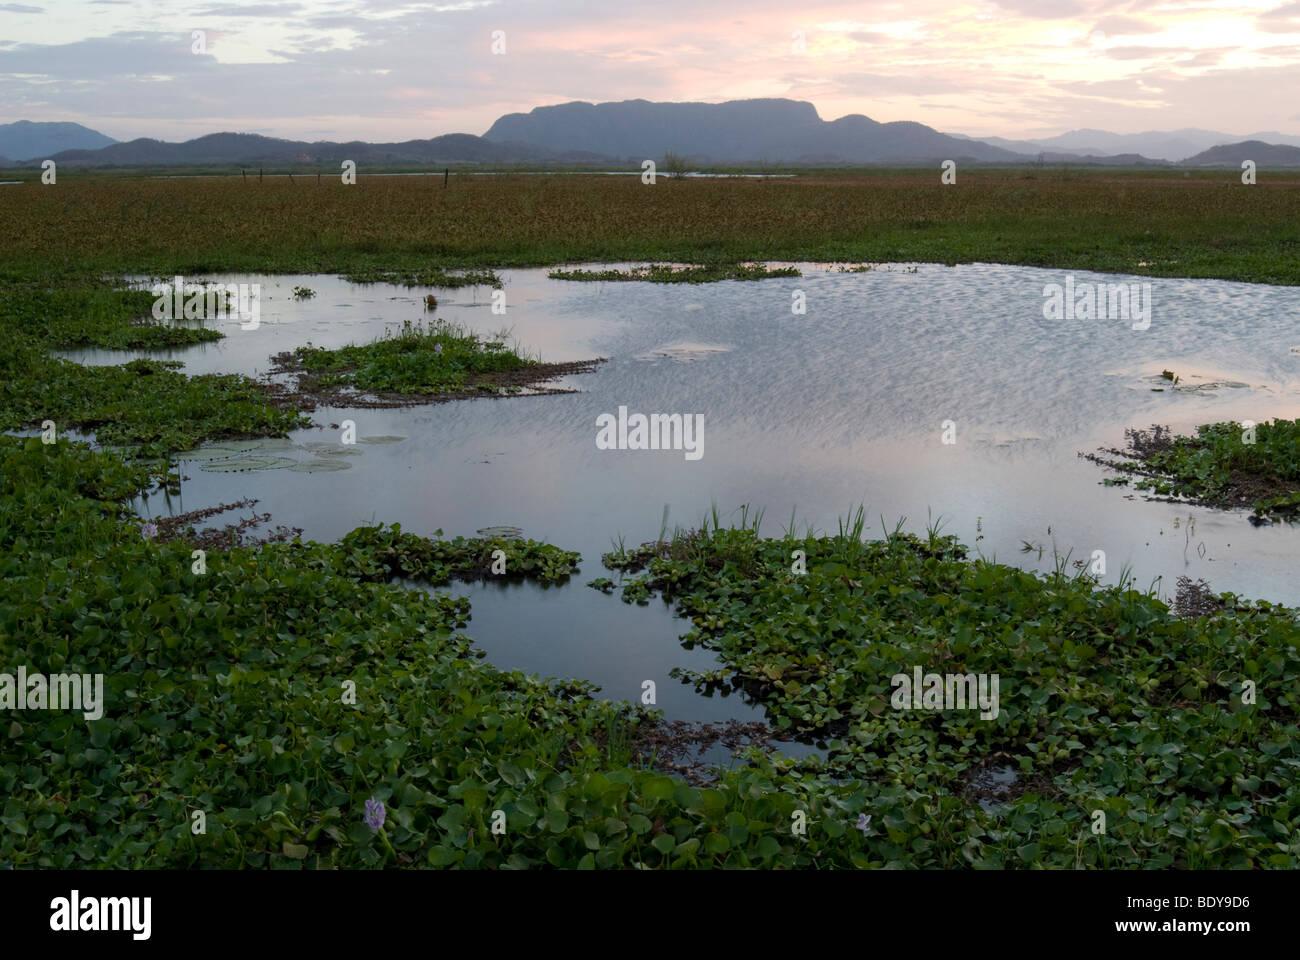 Swamp at Palo Verde National Park, Costa Rica at dusk. Stock Photo